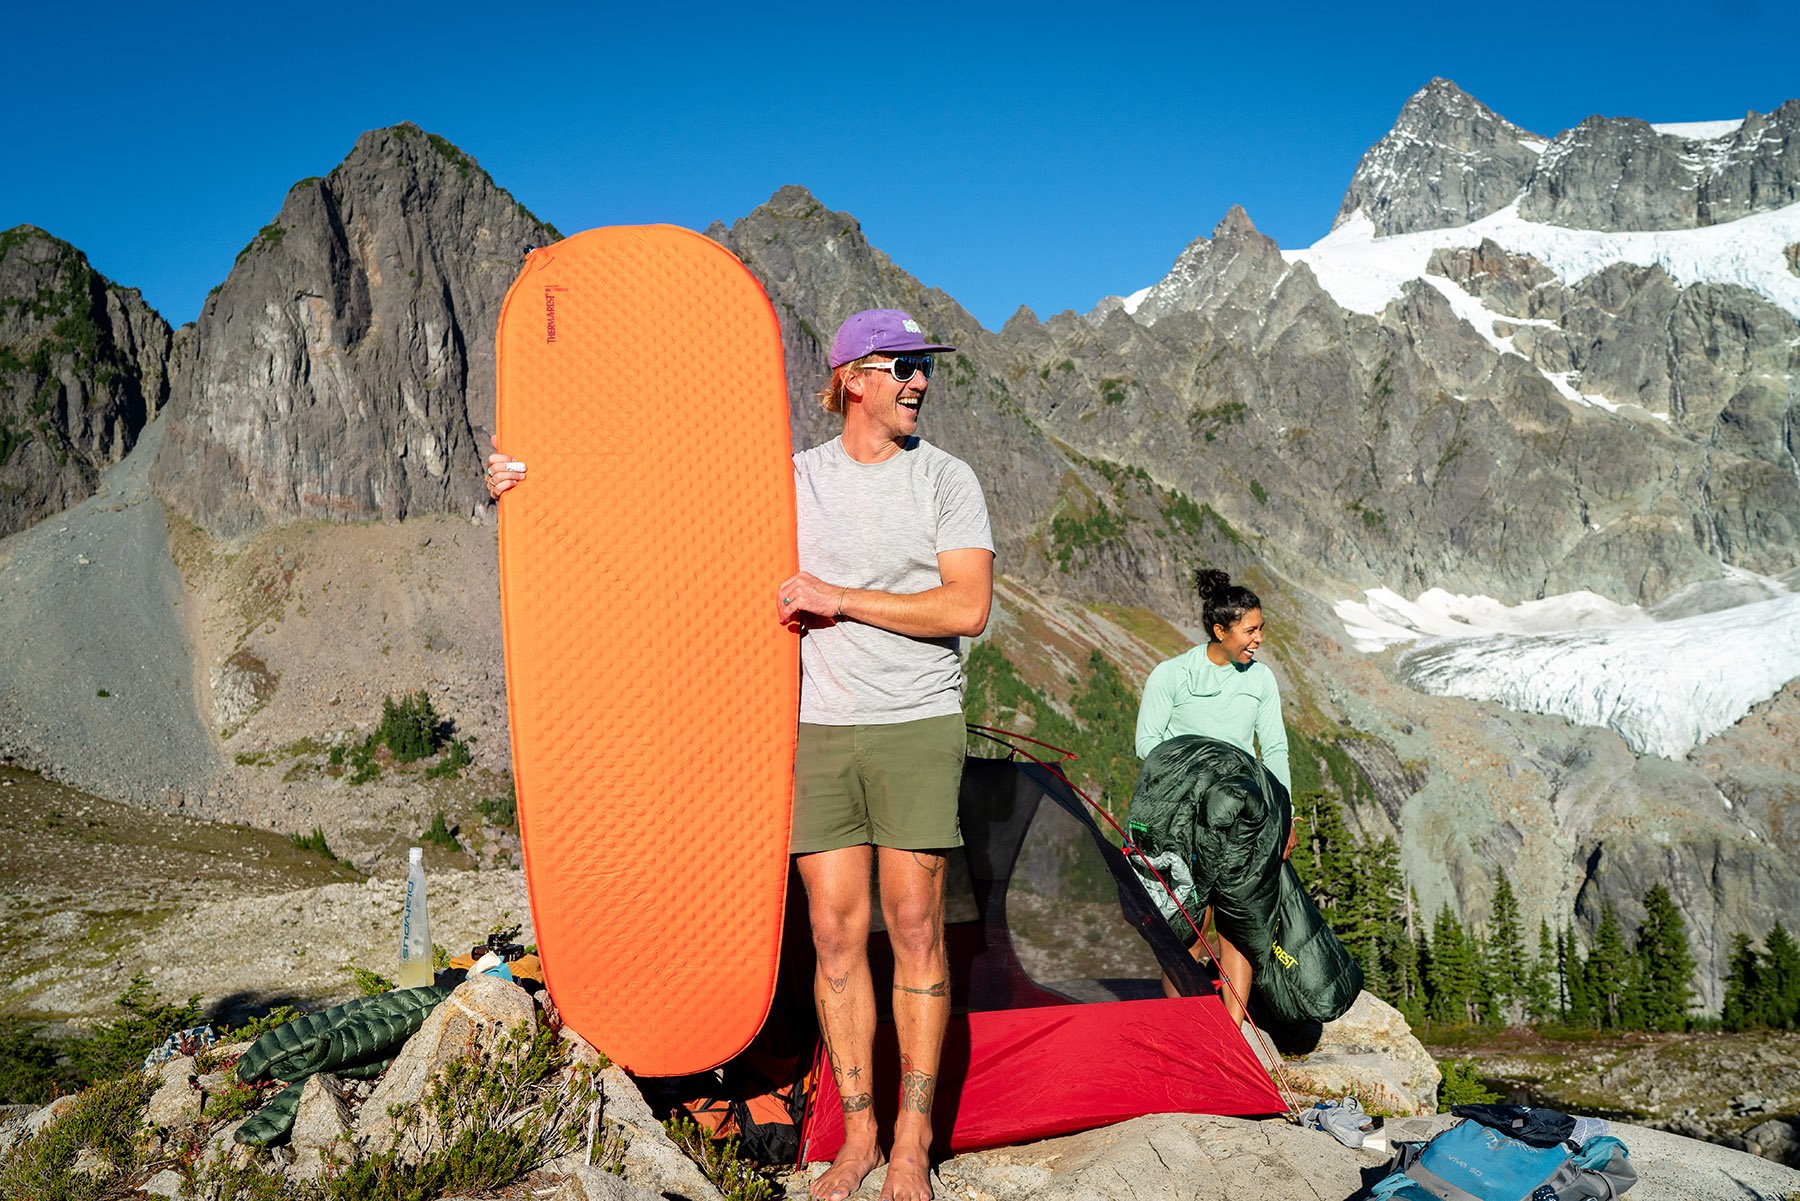 Thermarest self inflating sleeping pad on backpacking trip